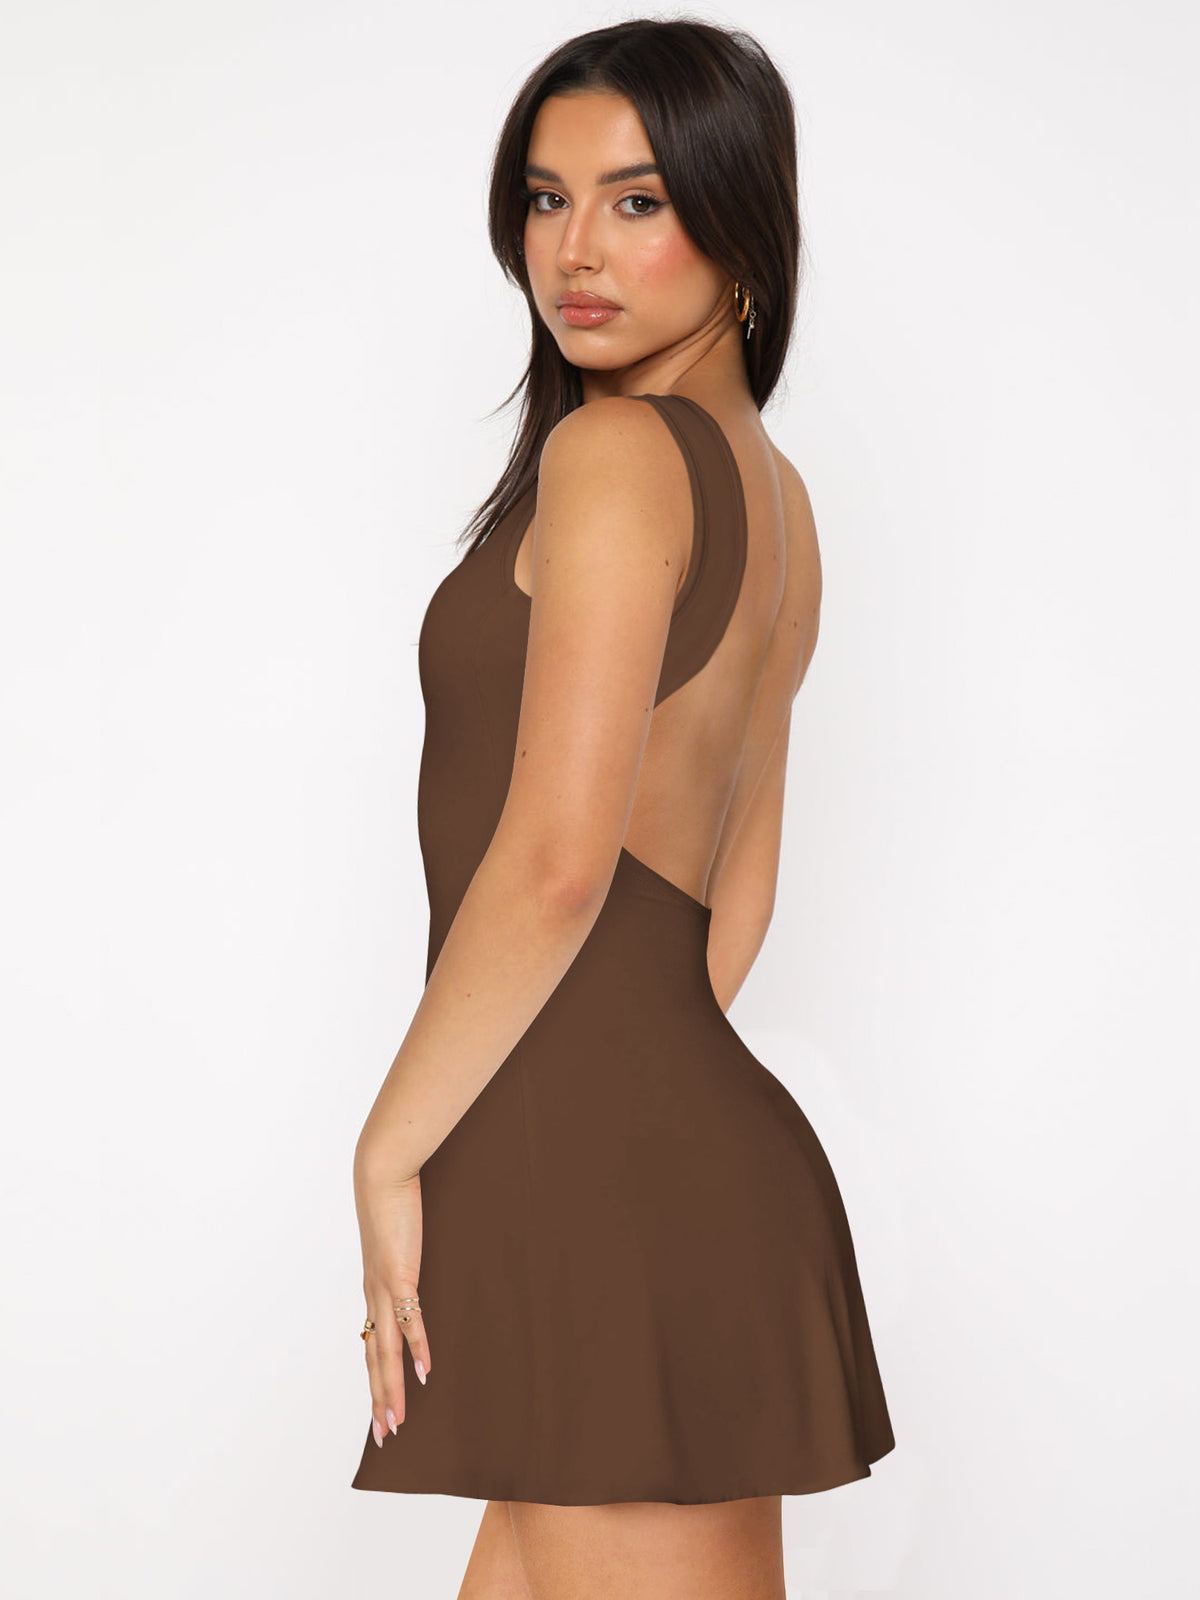 dresses, nice dresses, brown dress, brown dresses, backless brown dress, short dresses, plain dresses, open back dresses, casual dresses, tight dresses, sexy dresses, nice clothes, trending fashion, cute clothes, mini dresses, causal day dresses, nice brown dresses, brown clothes, birthday gifts, anniversary gifts, confortable dresses, designer fashion 